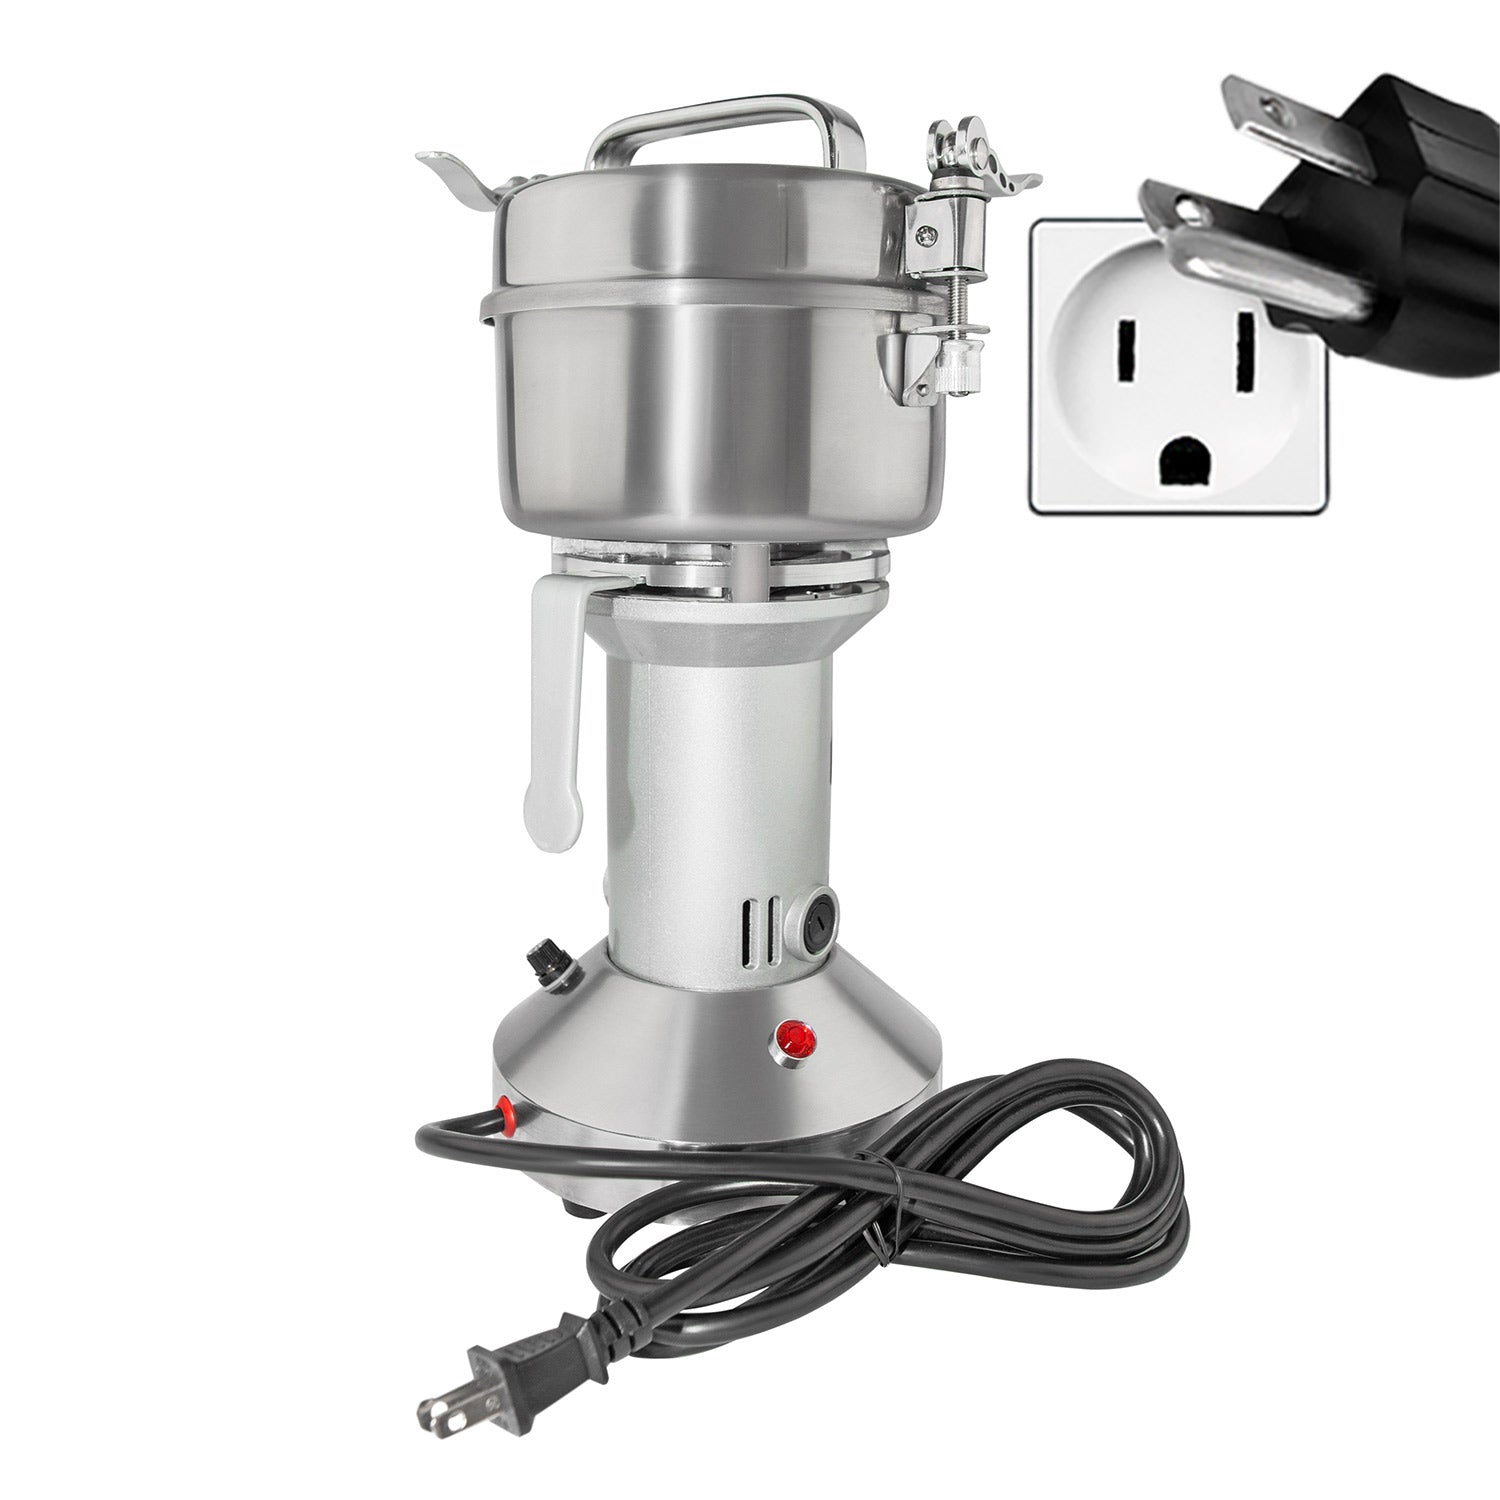 GR-V350 Grain Mill Commercial | Electric Wheat Grinder | 350g | Spices and Herbs| Stainless Steel